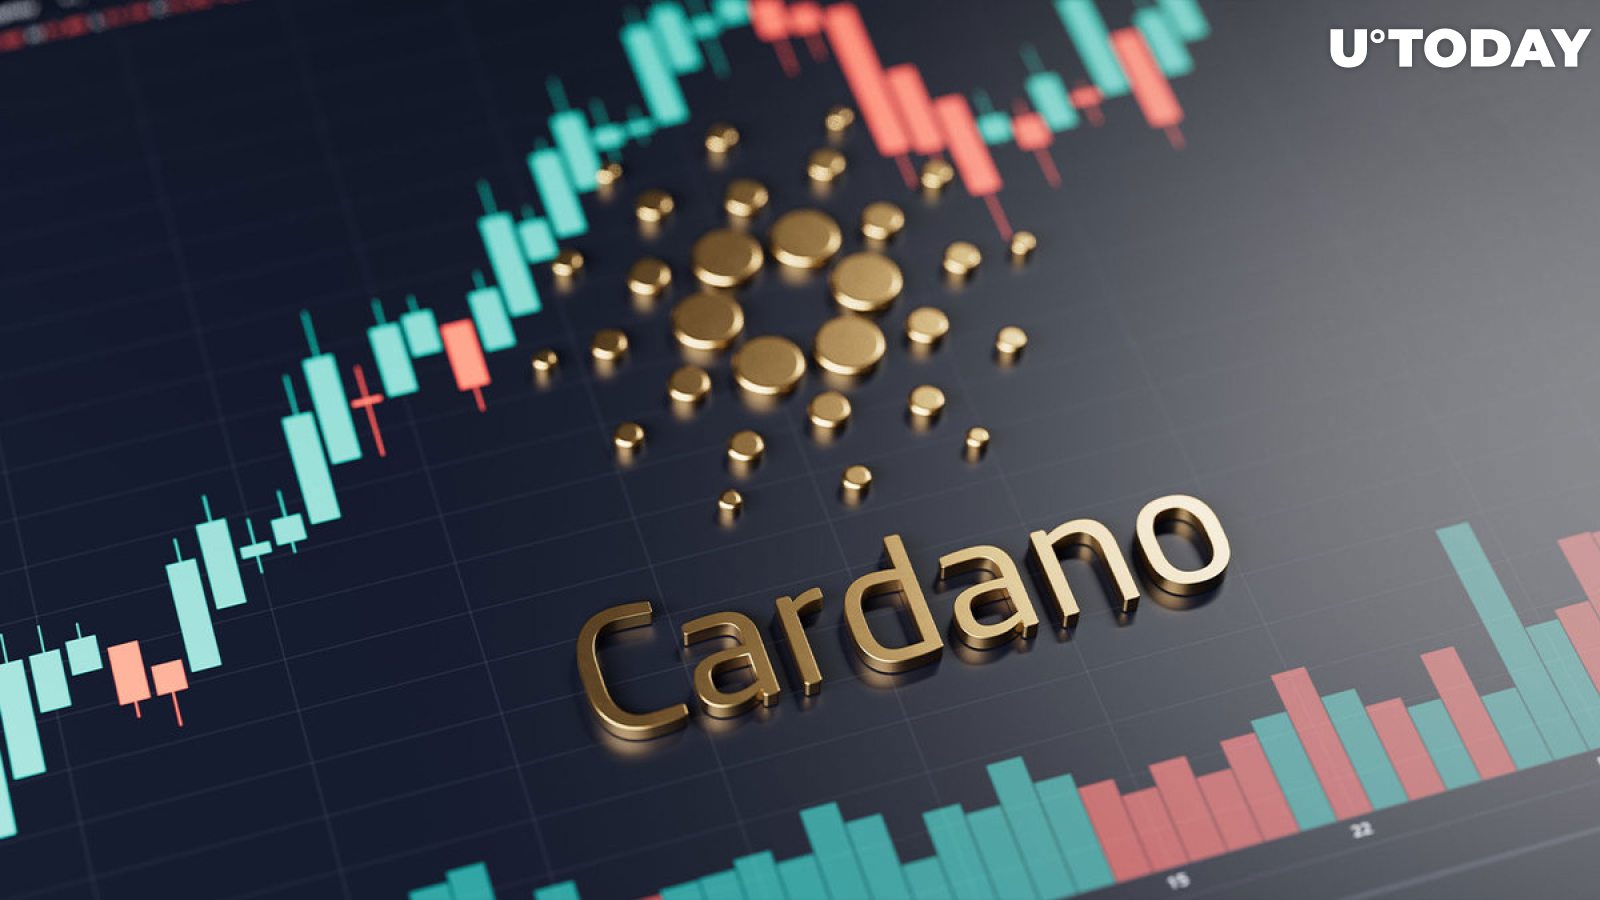 Cardano (ADA) Price Reaching This Zone Sparks Large Investor Activity